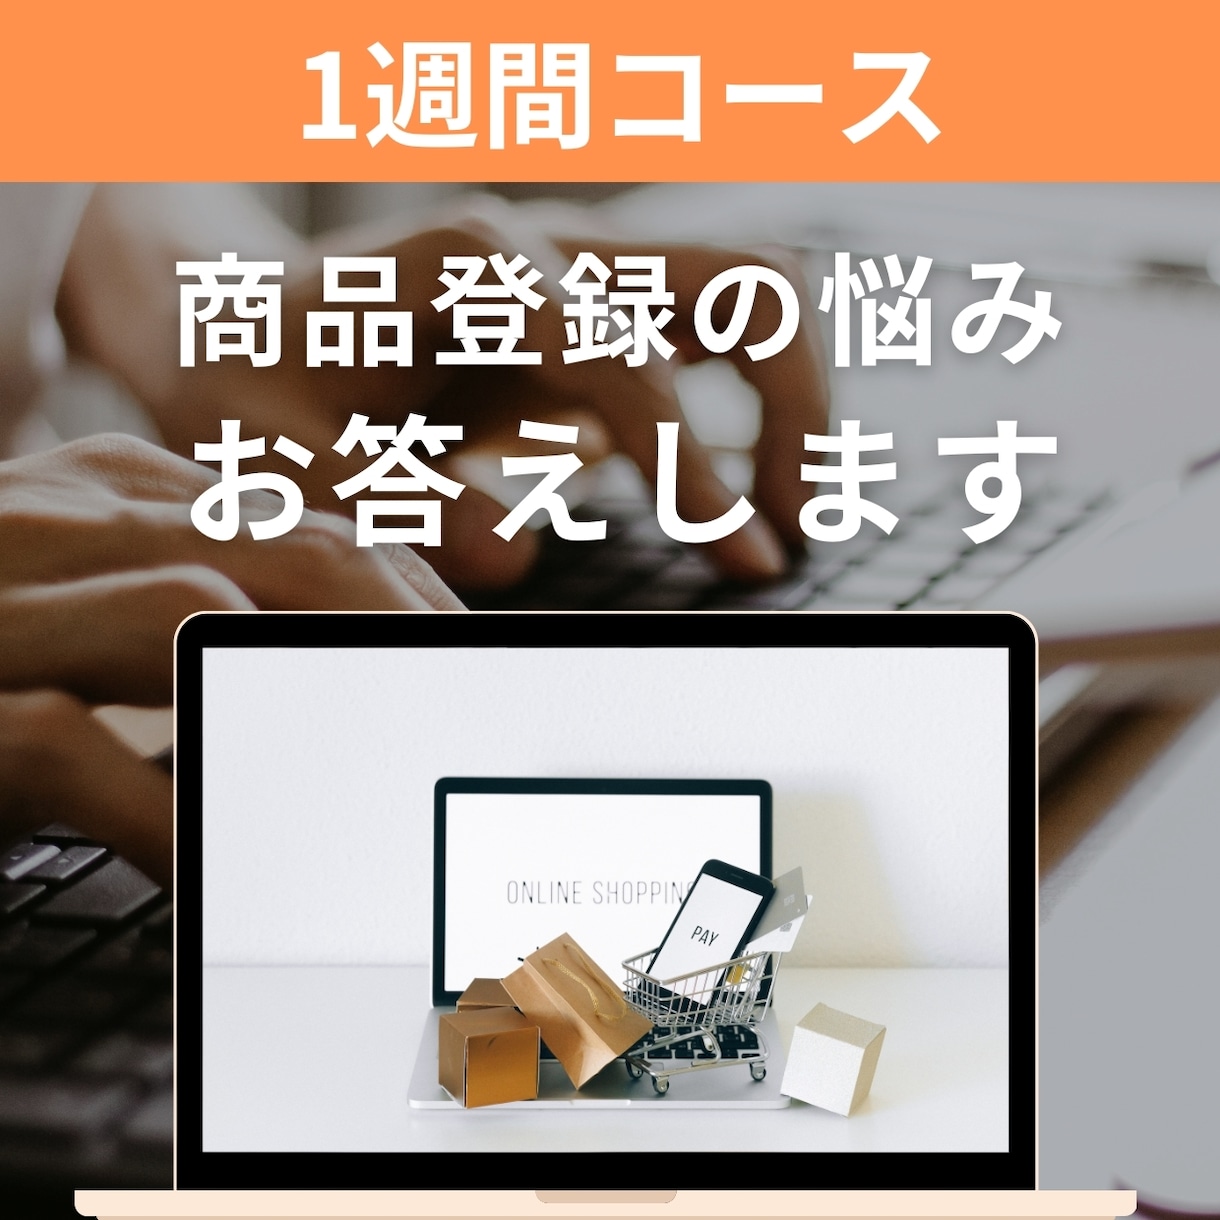 💬Coconara｜We will answer questions about product registration on Yahoo and Rakuten for one week kotonoha1 00….